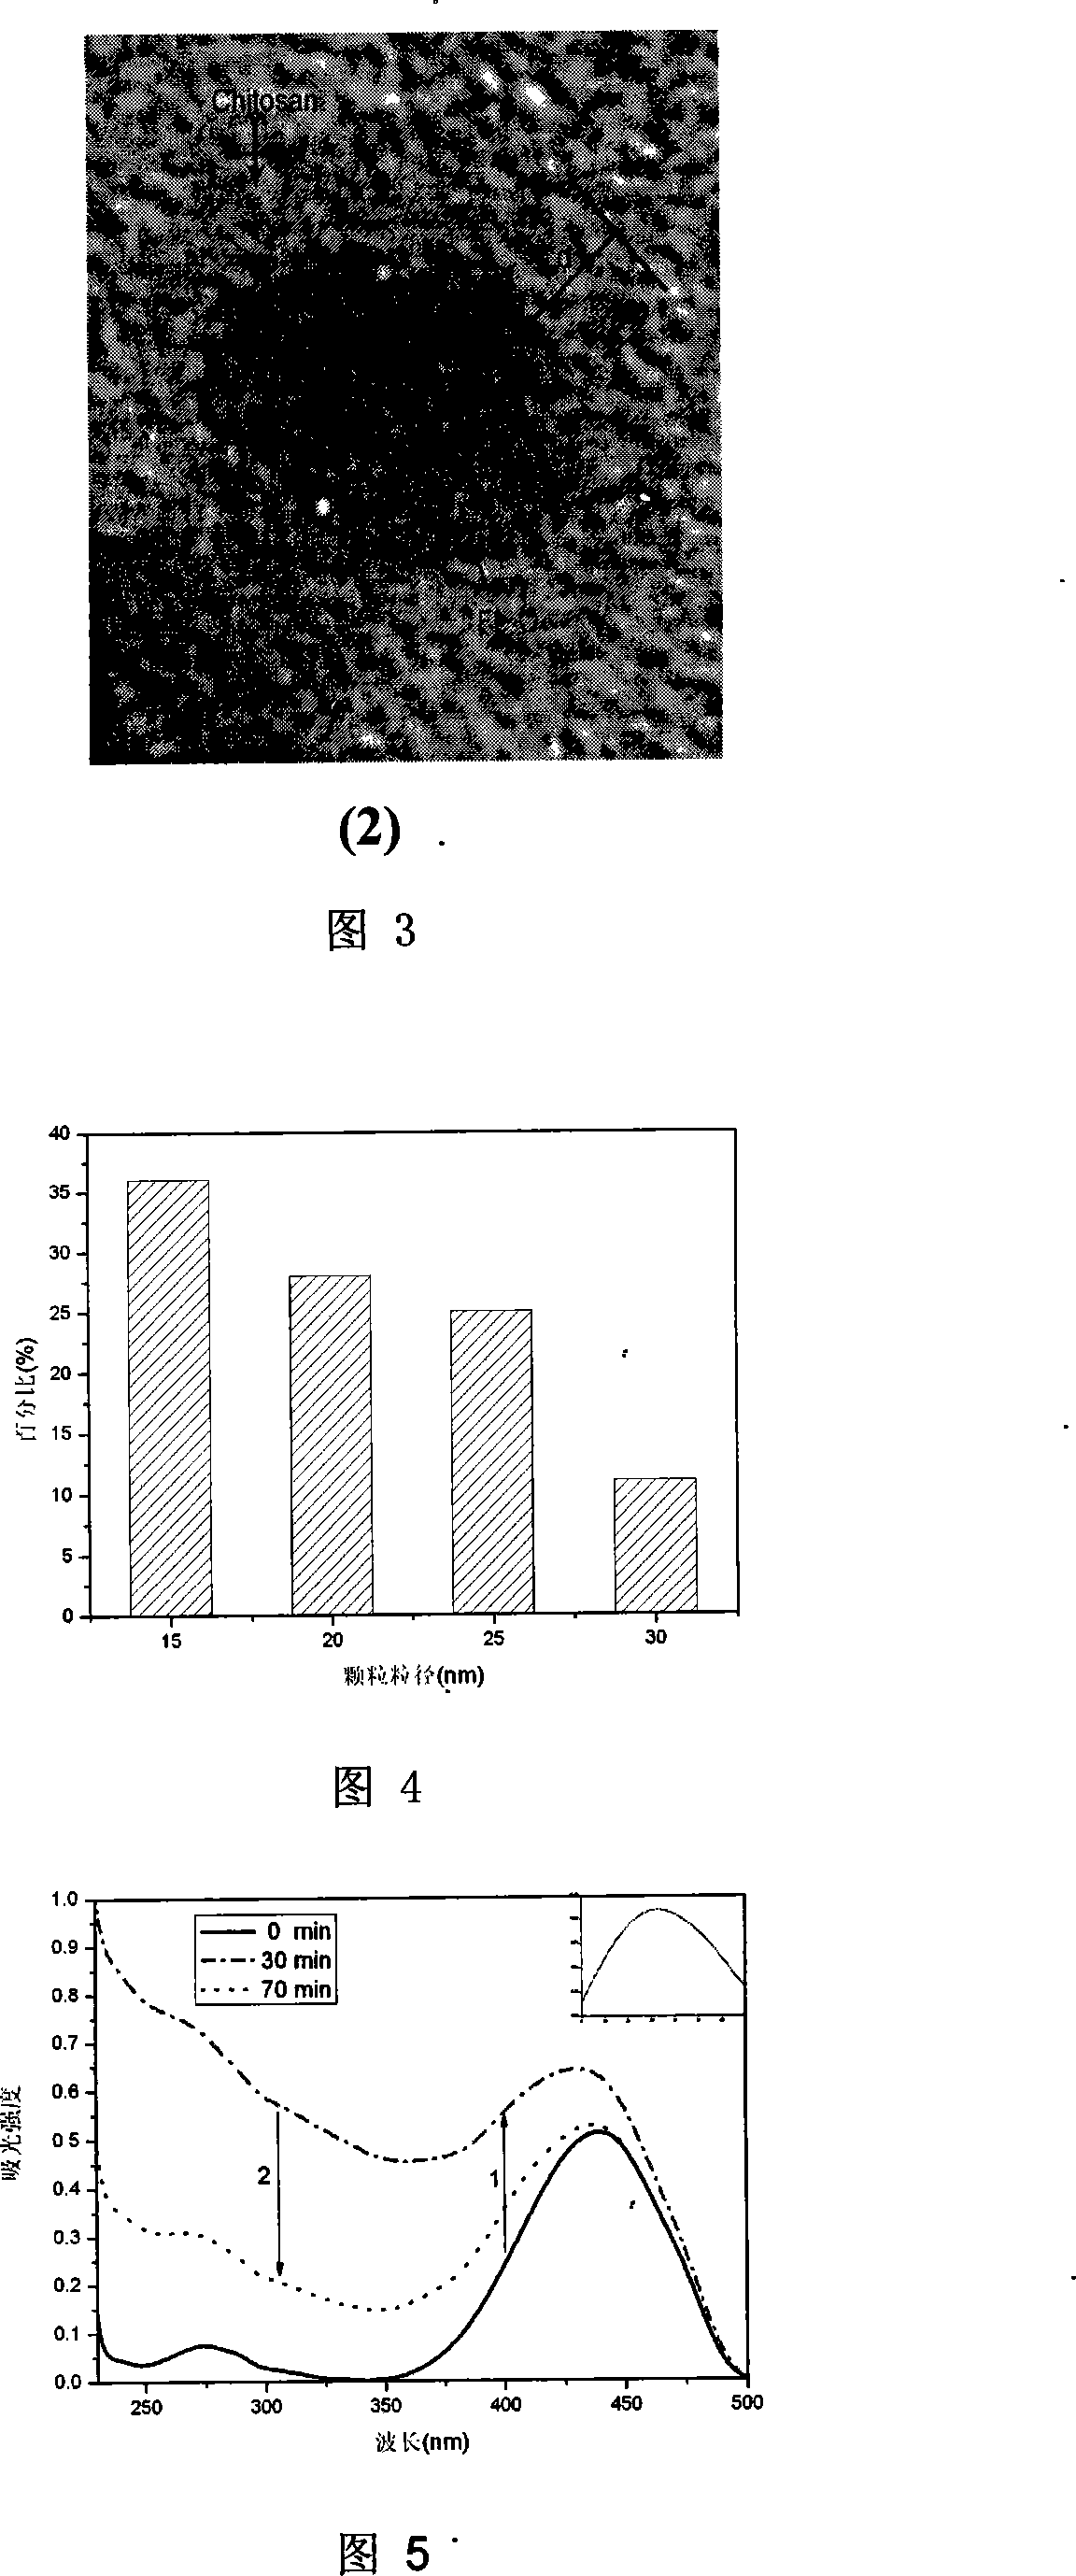 Method of producing nano magnetic chitosan composite particle for photodynamic medicament carrier